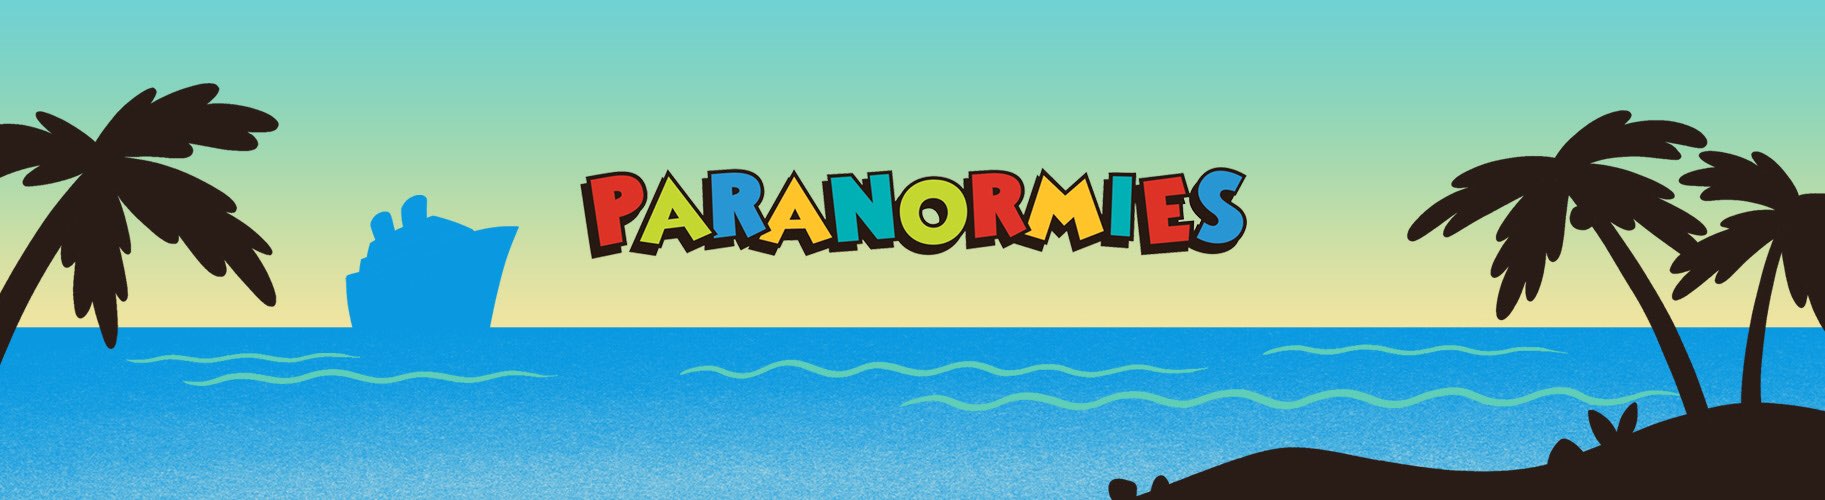 Paranormies banner